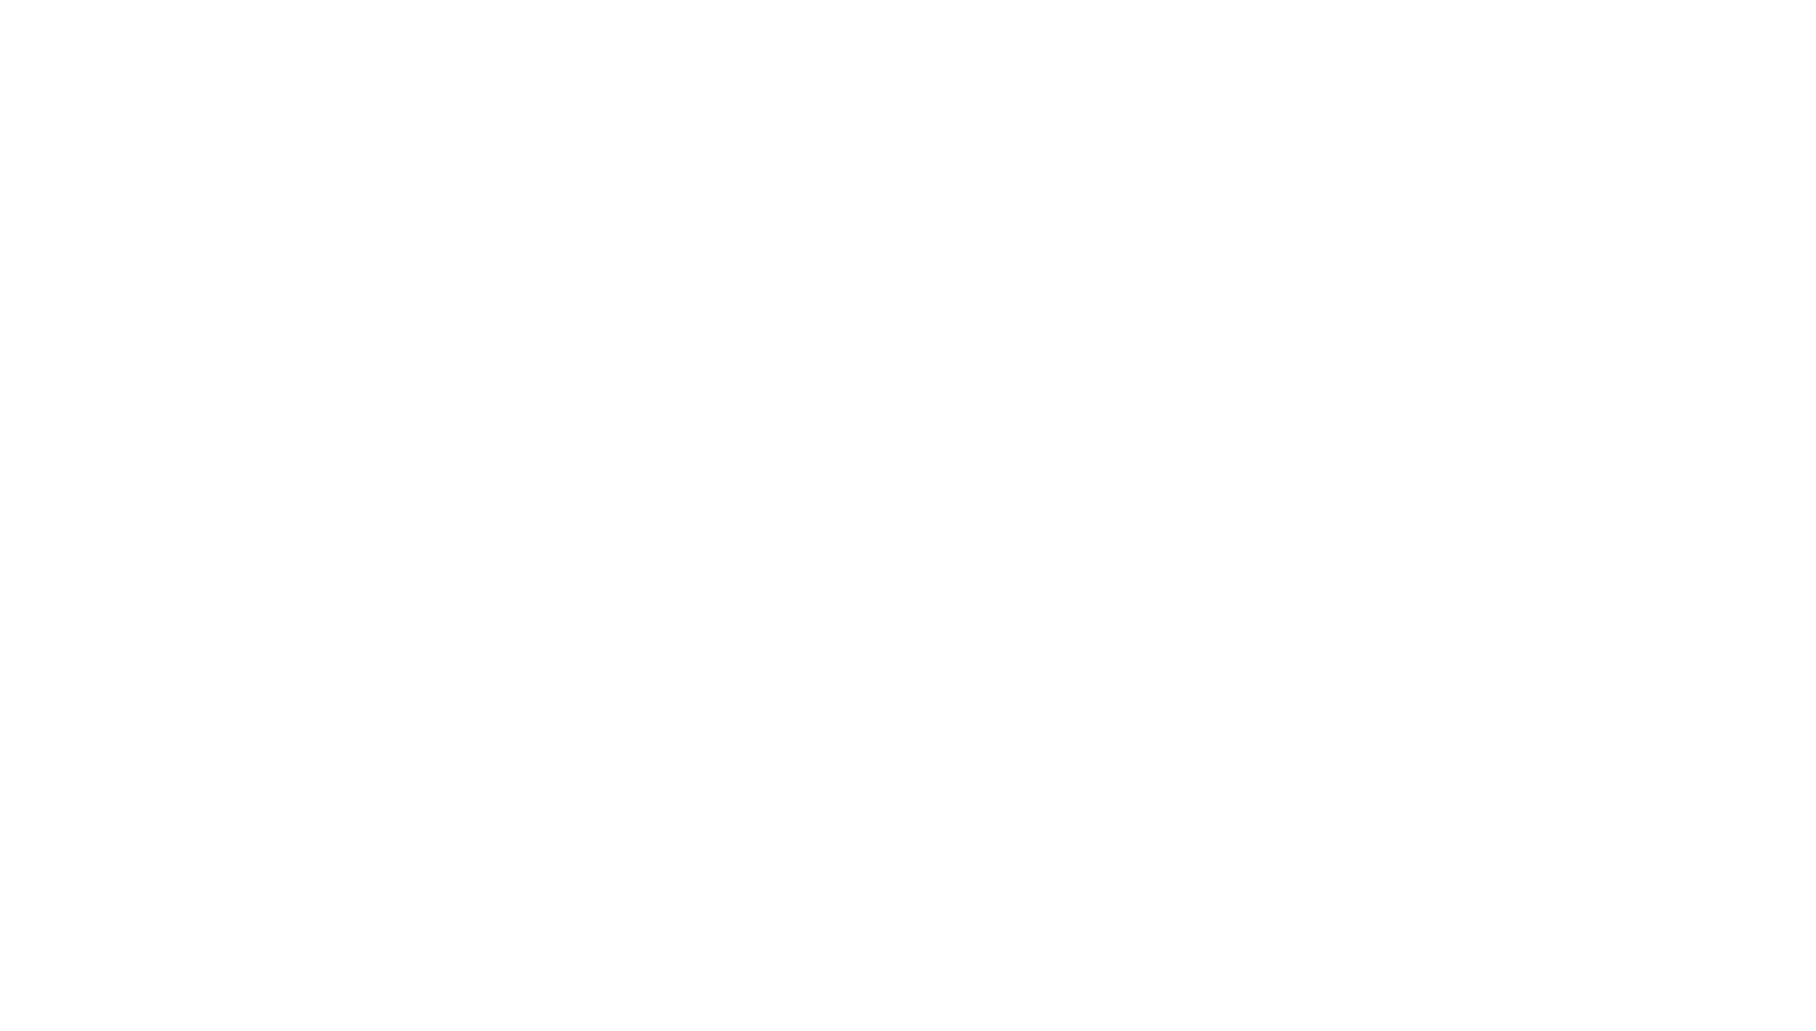 Pixxel Cleaning